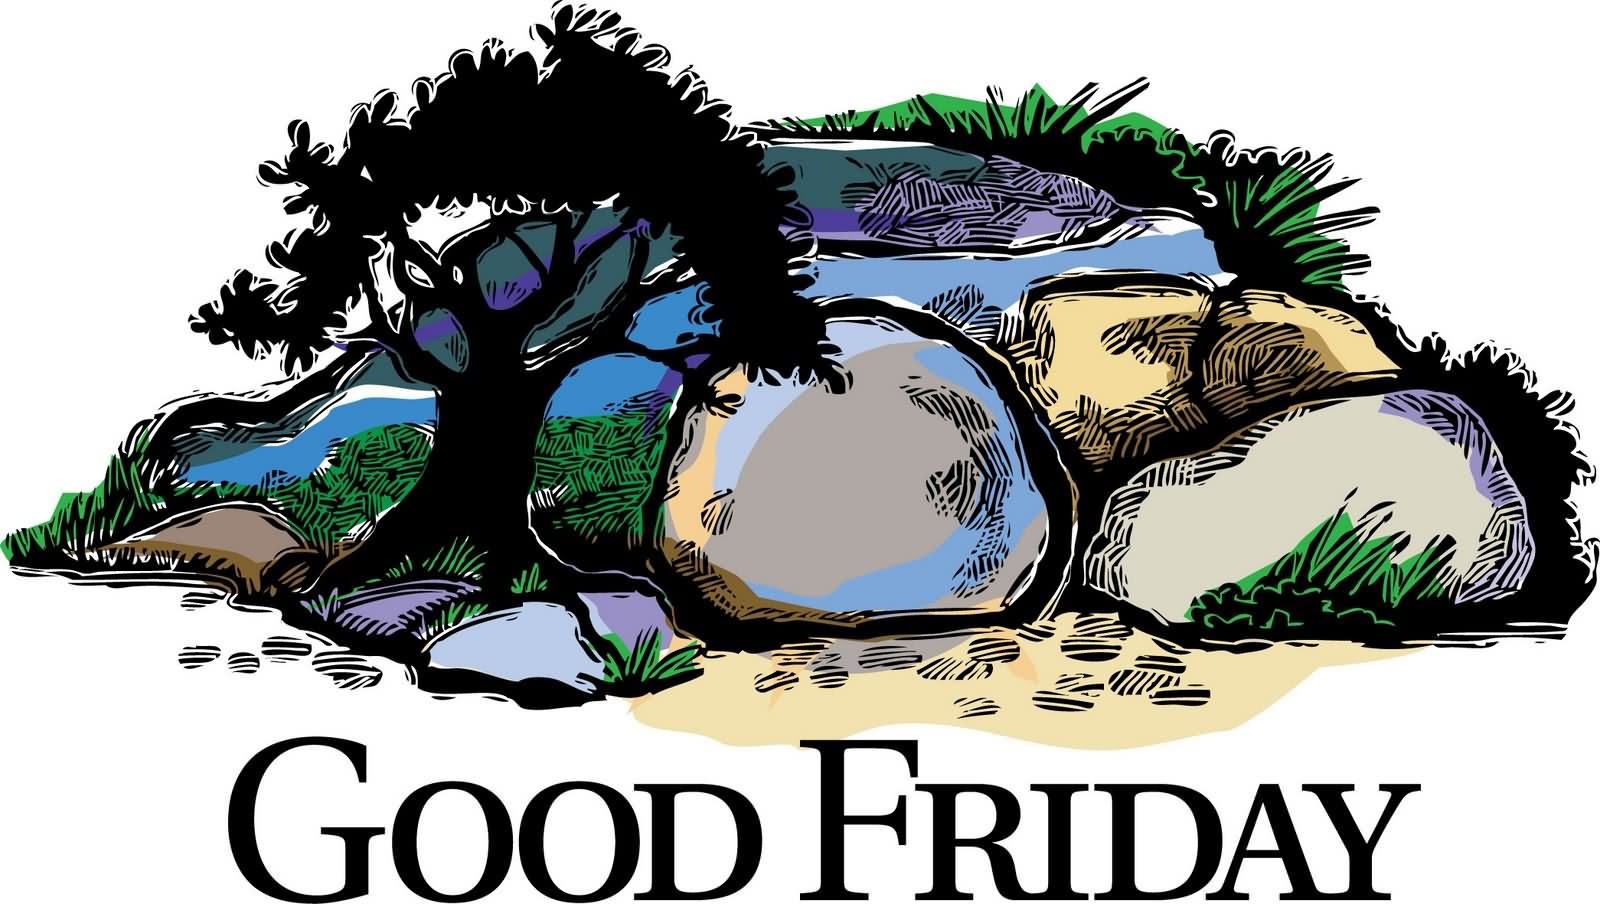 free clipart images good friday - photo #7